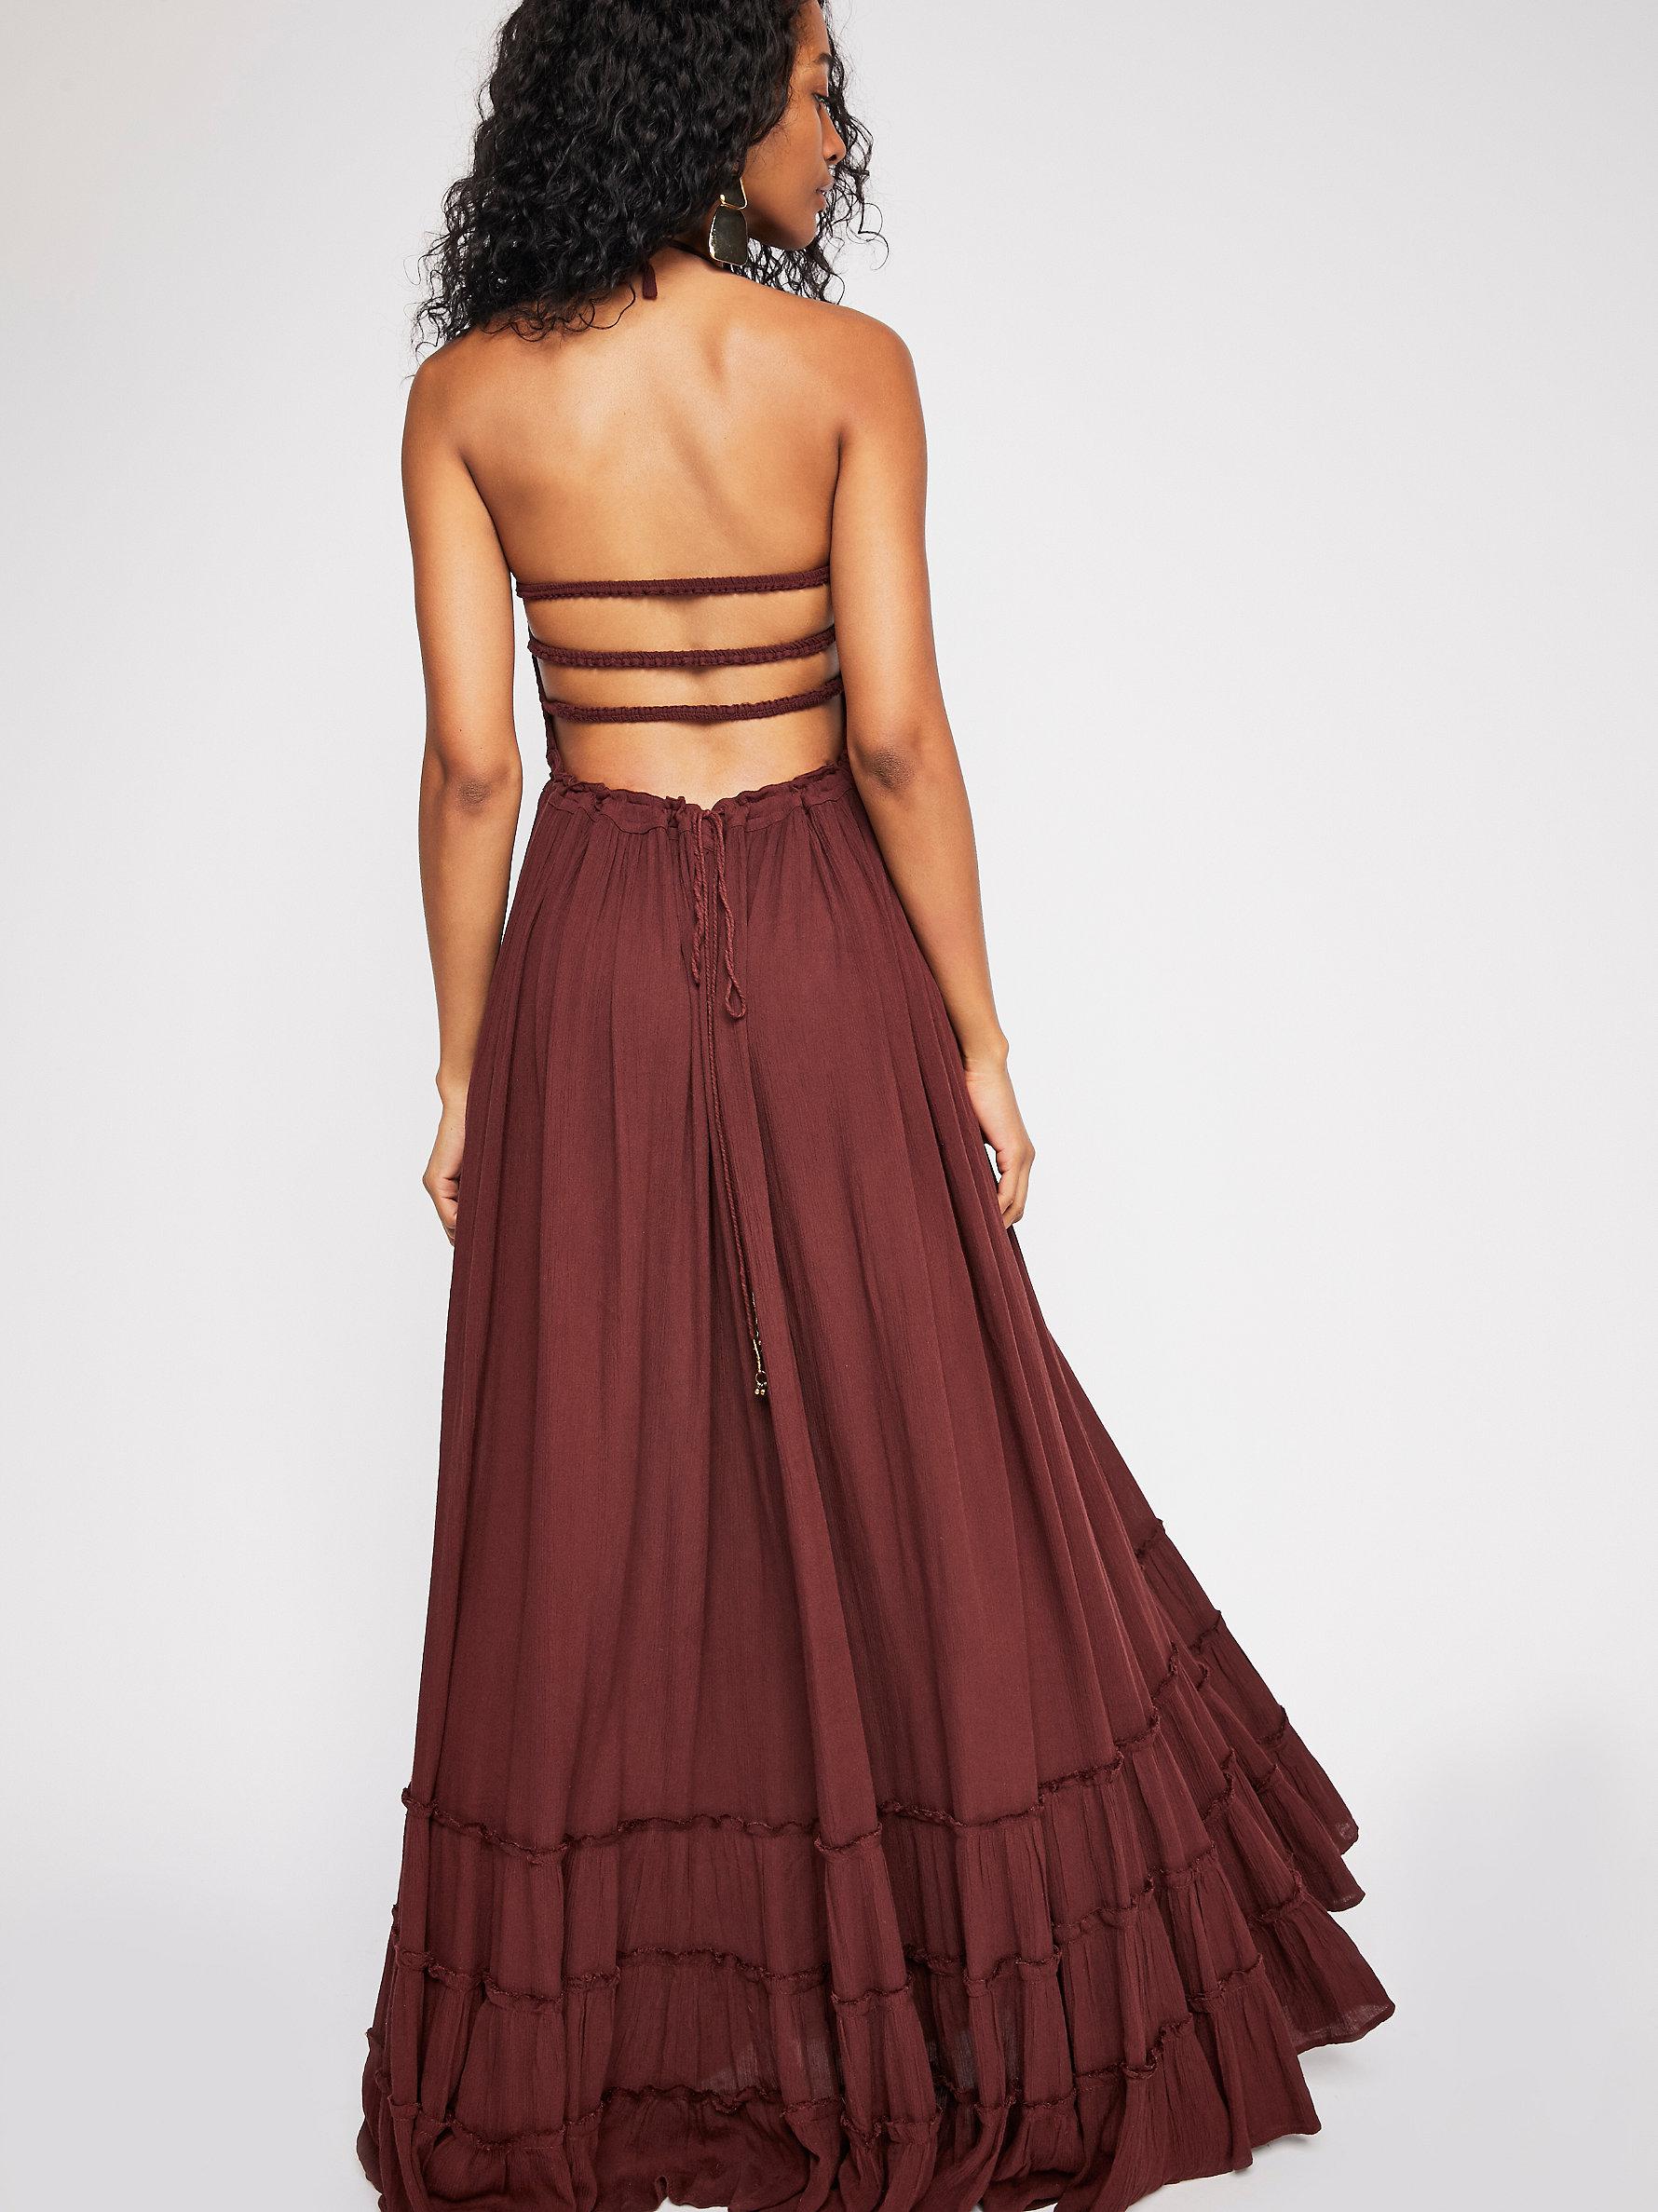 NWT Free People Extratropical Maxi Dress in Elven Lily iuu.org.tr